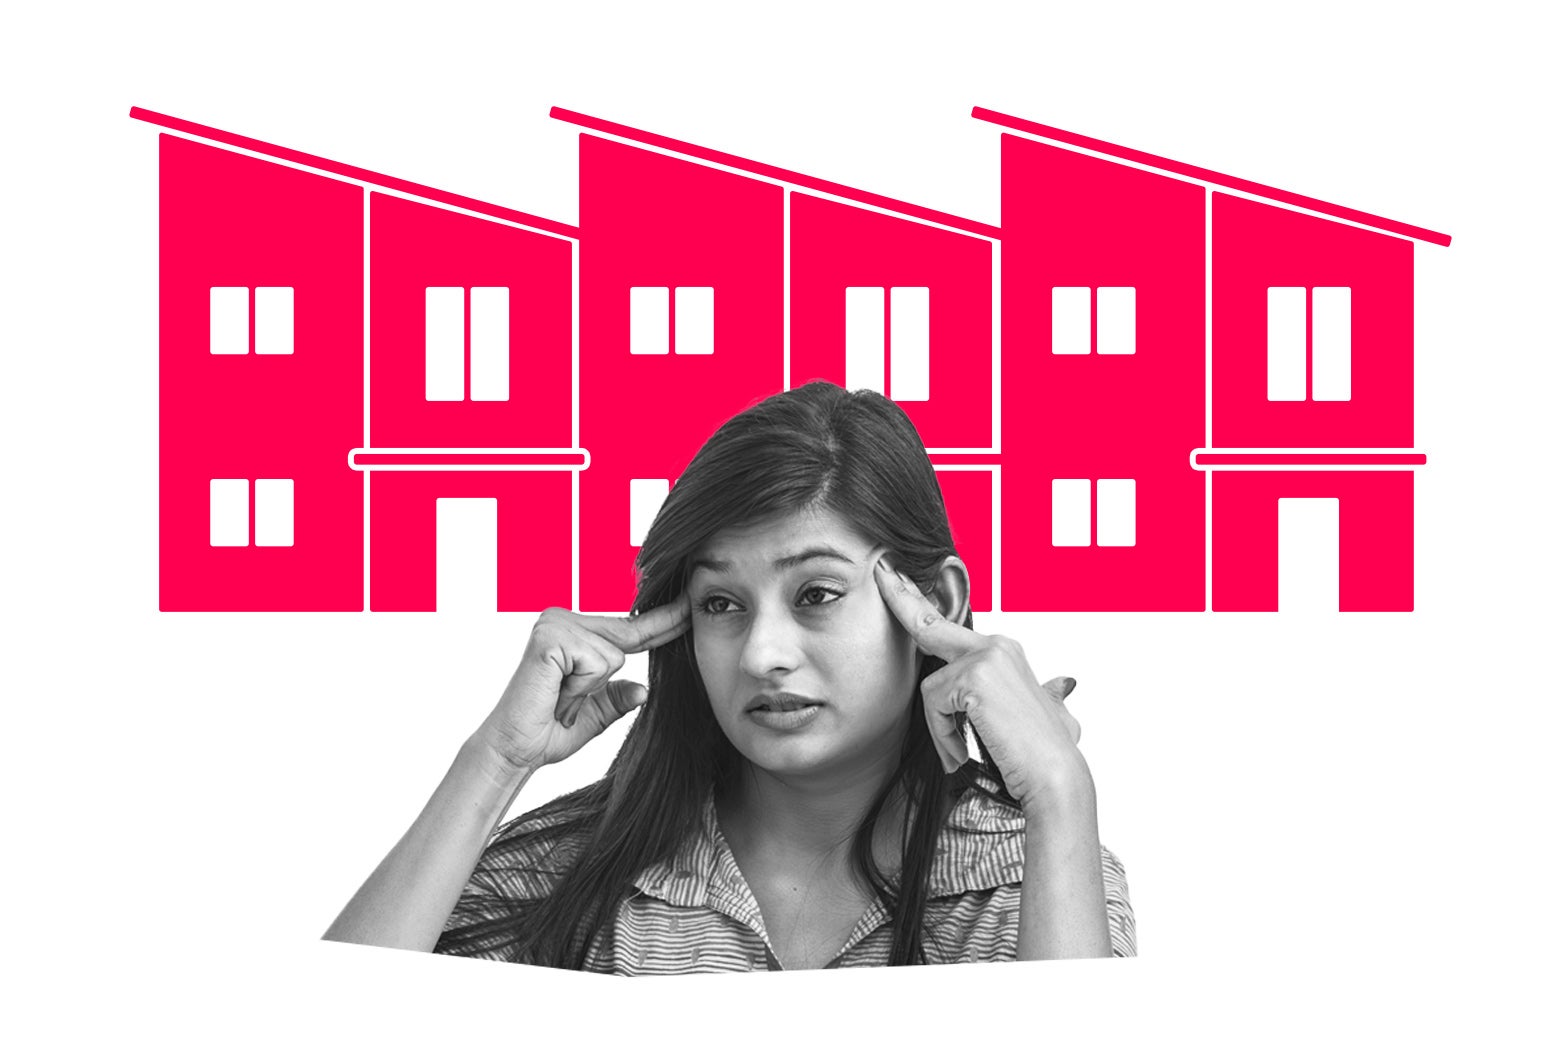 A woman massages her temples in pain in front of an illustrated row of townhomes.